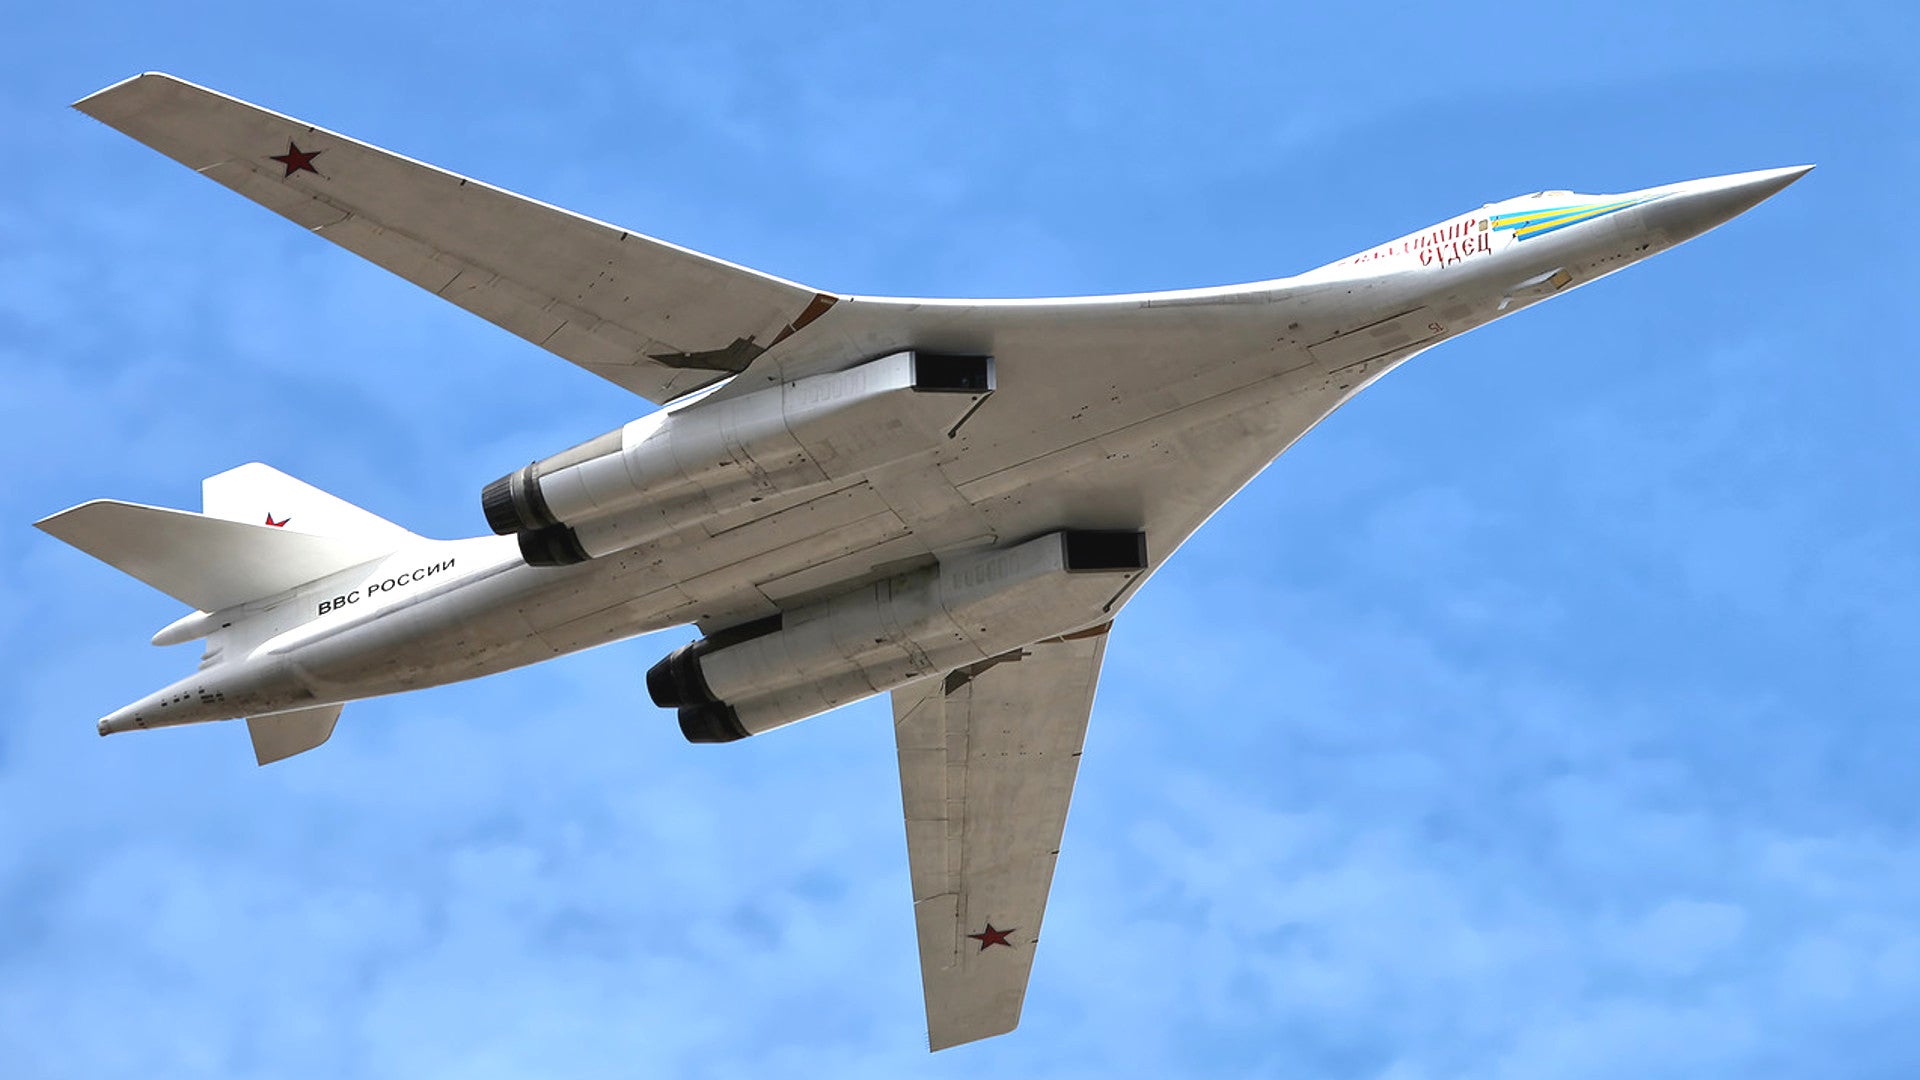 Russia Says Its Future Bombers Will Have Protection From “All Missiles”